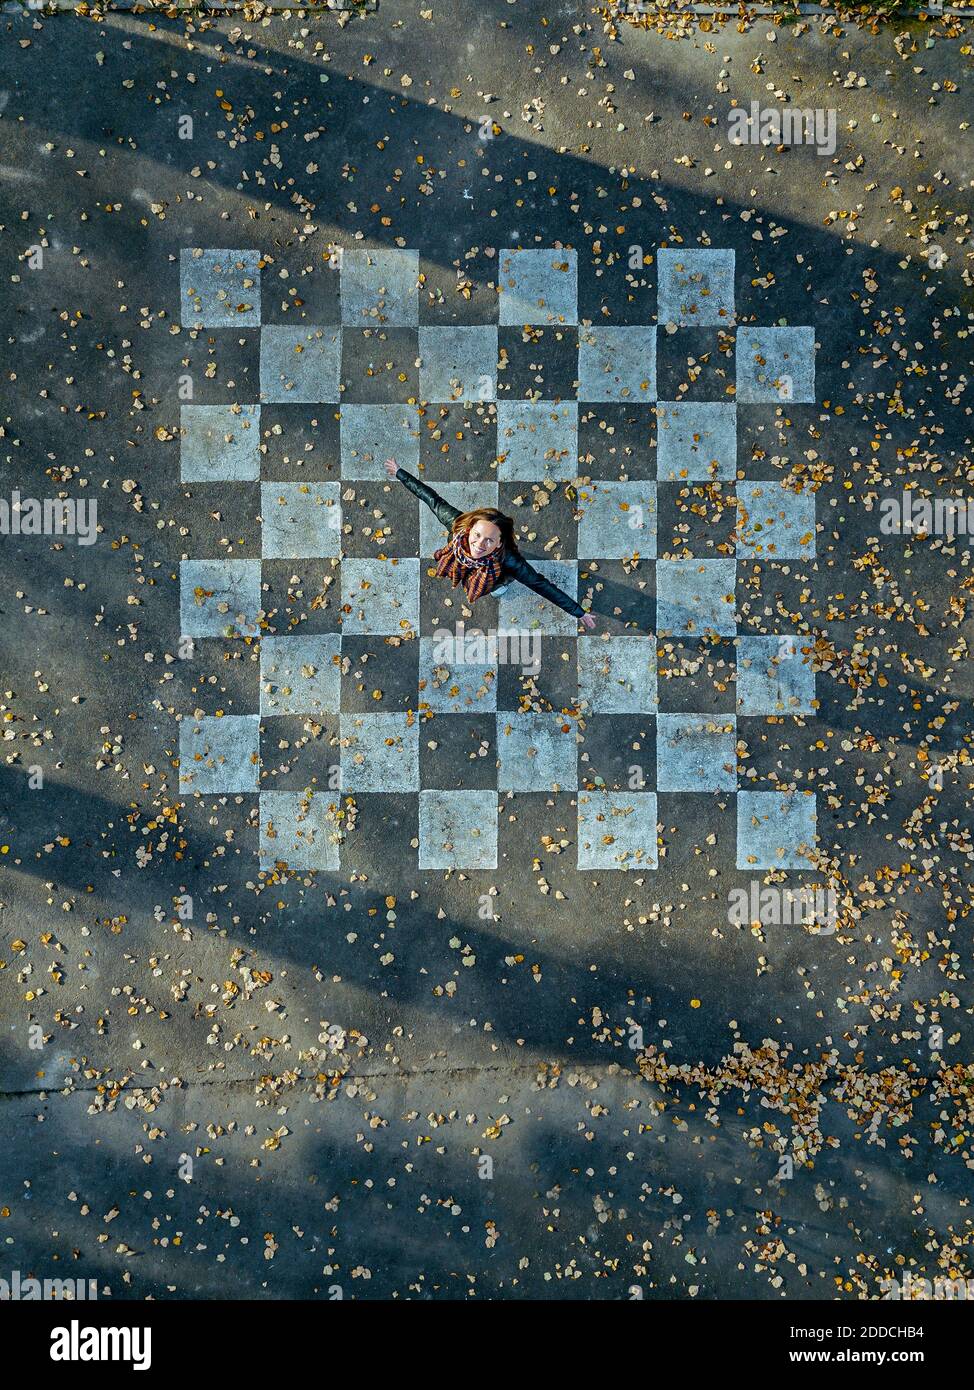 Mid adult woman with arms outstretched spinning on asphalt painted with chessboard pattern Stock Photo